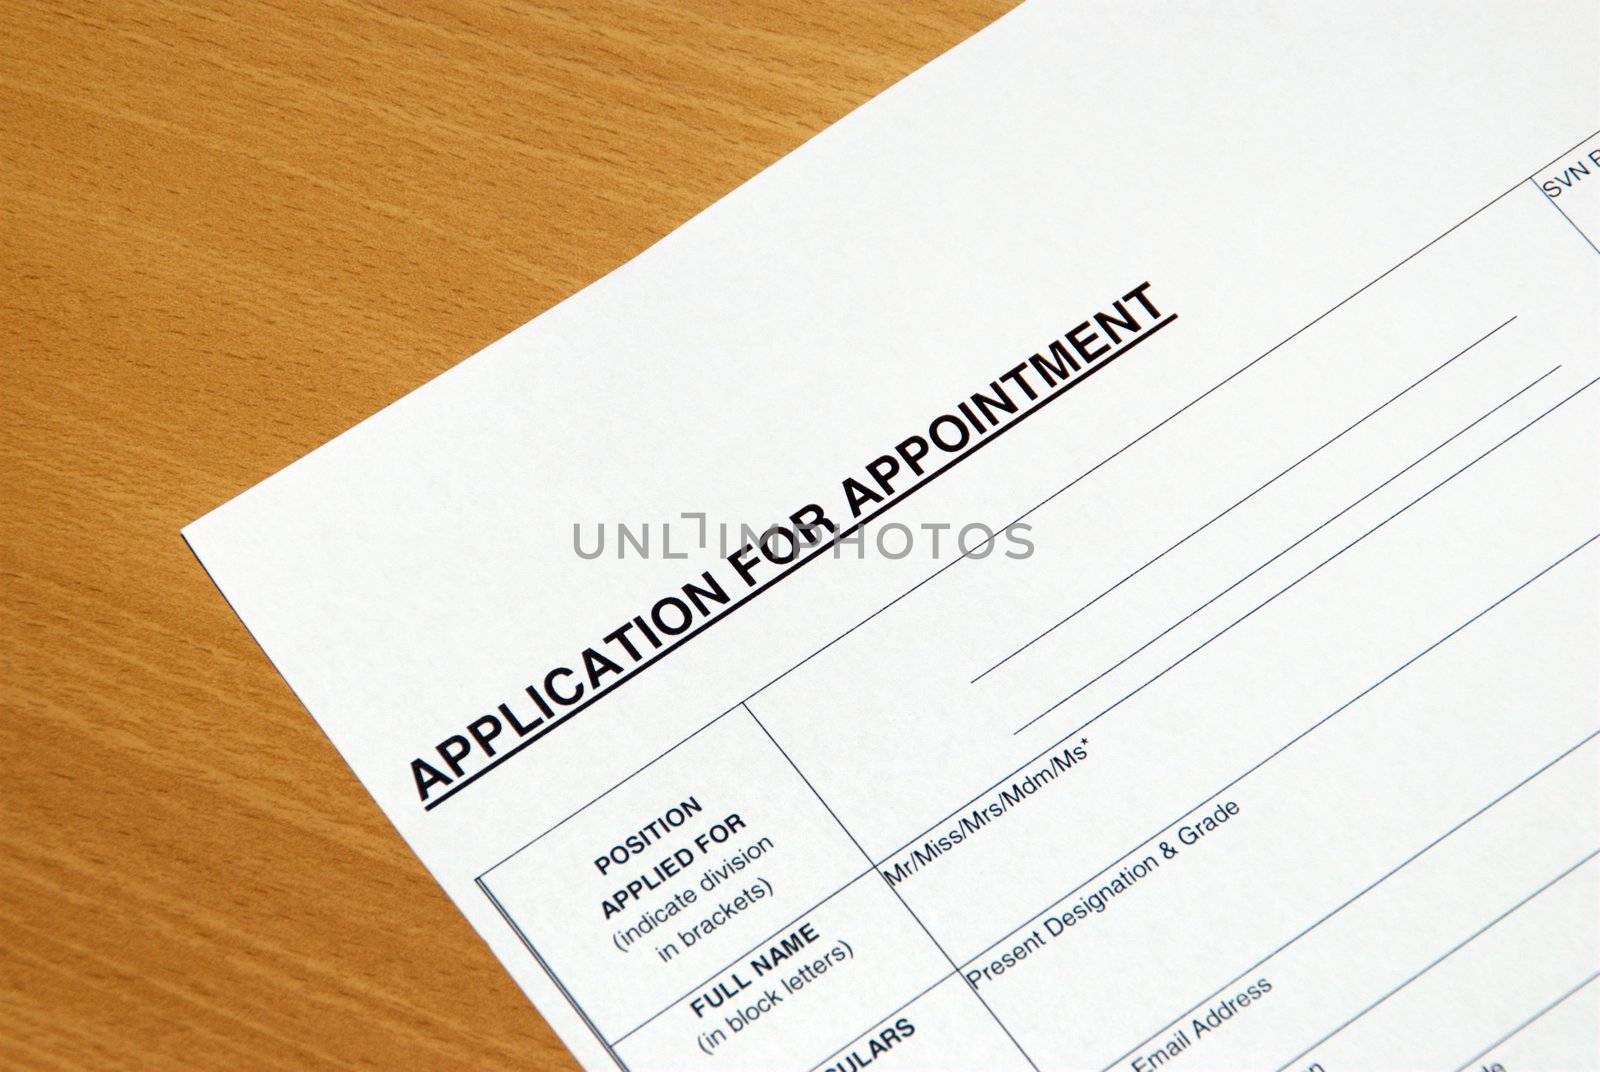 This is a image of appointment form.